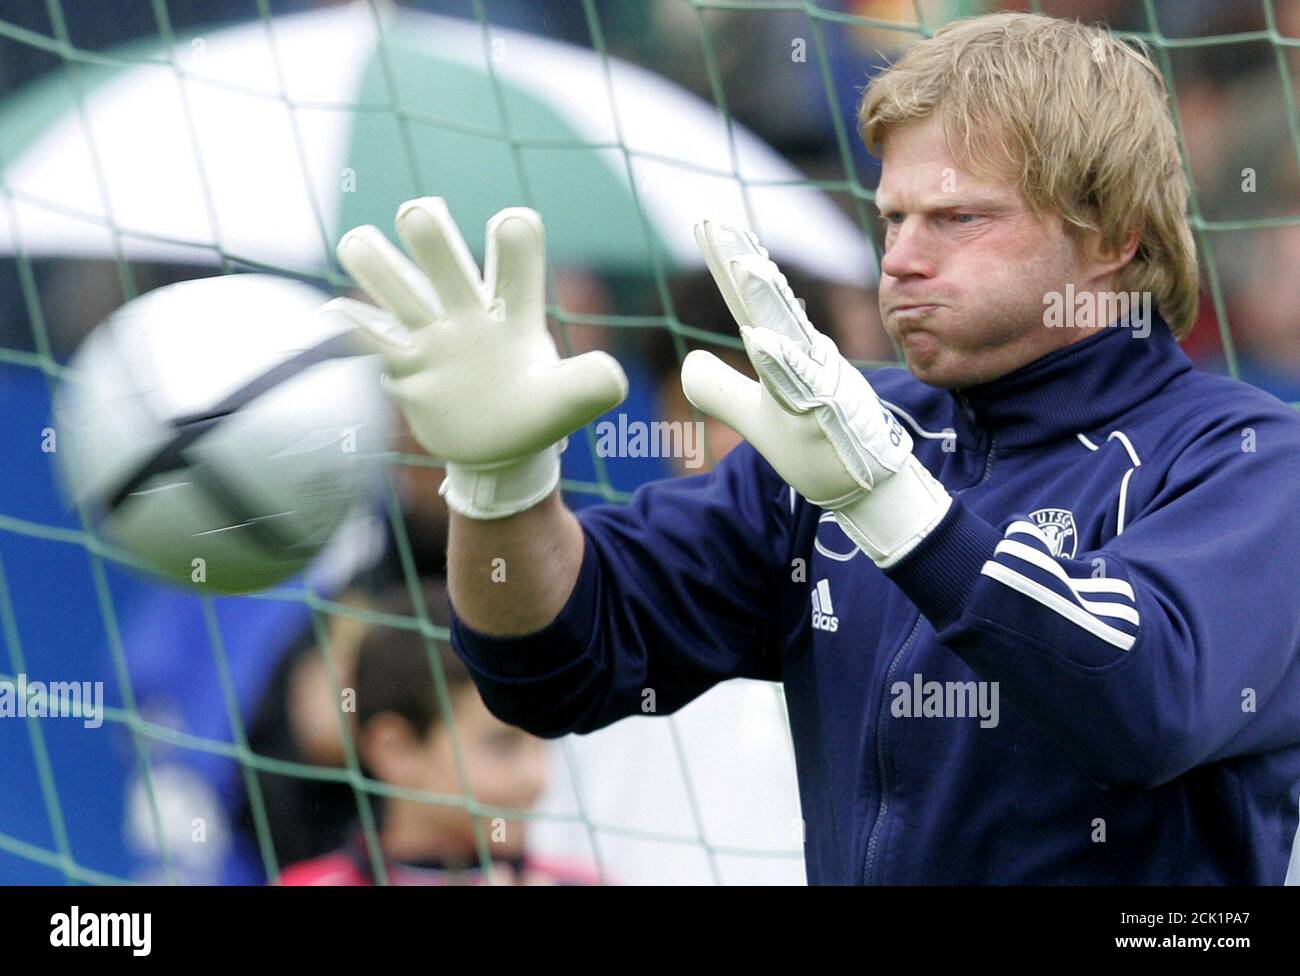 Oliver Kahn, goalkeeper of Germany's national soccer team, catches a ball  during a training session in Winden June 1, 2004. Goalkeeper and captain  Kahn became the latest Germany player to make headlines